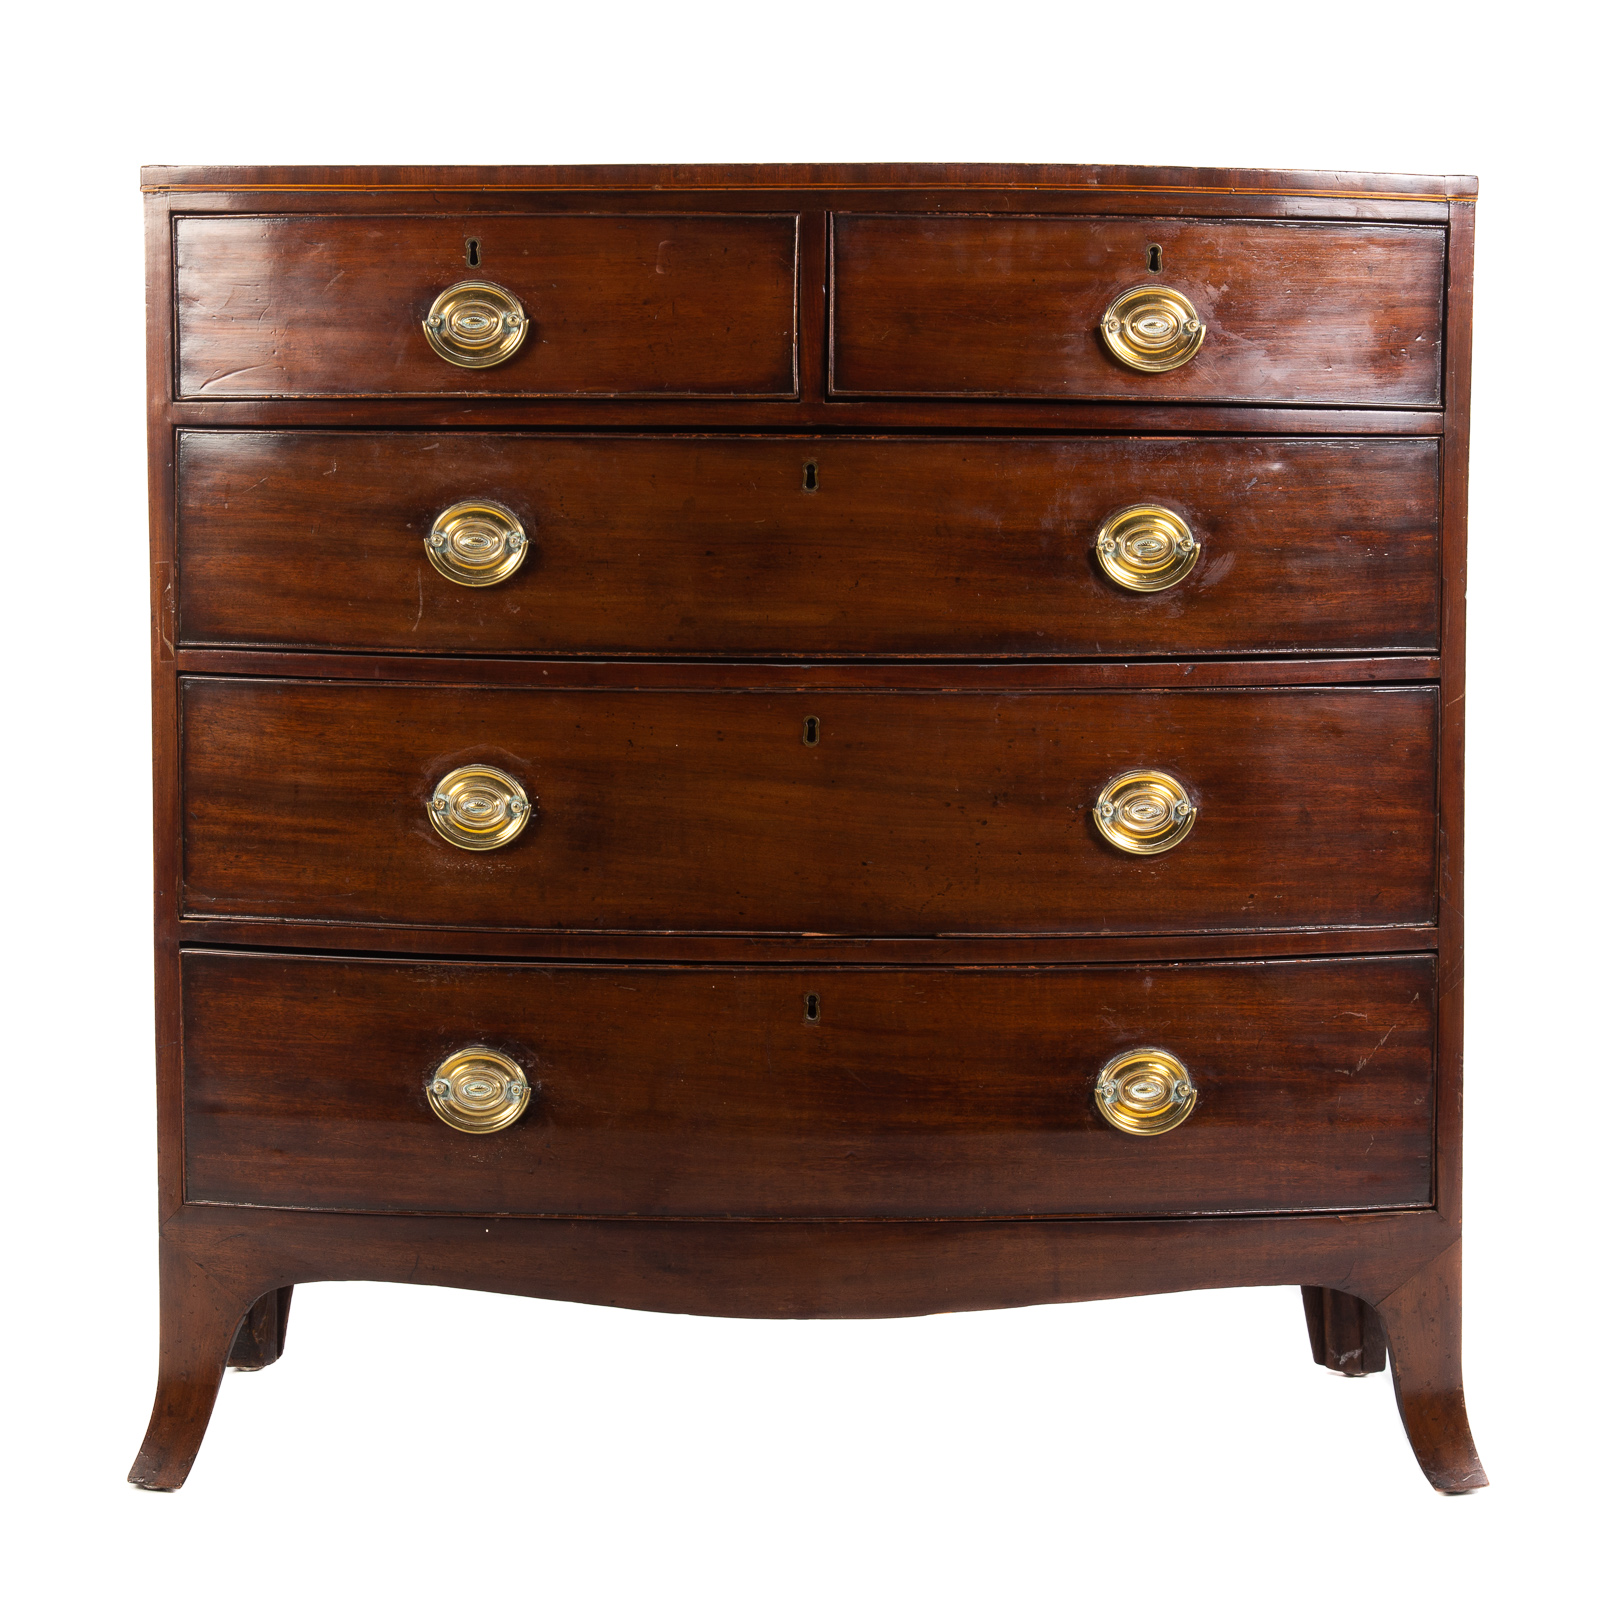 GEORGE III MAHOGANY BOW FRONT CHEST 29e8be